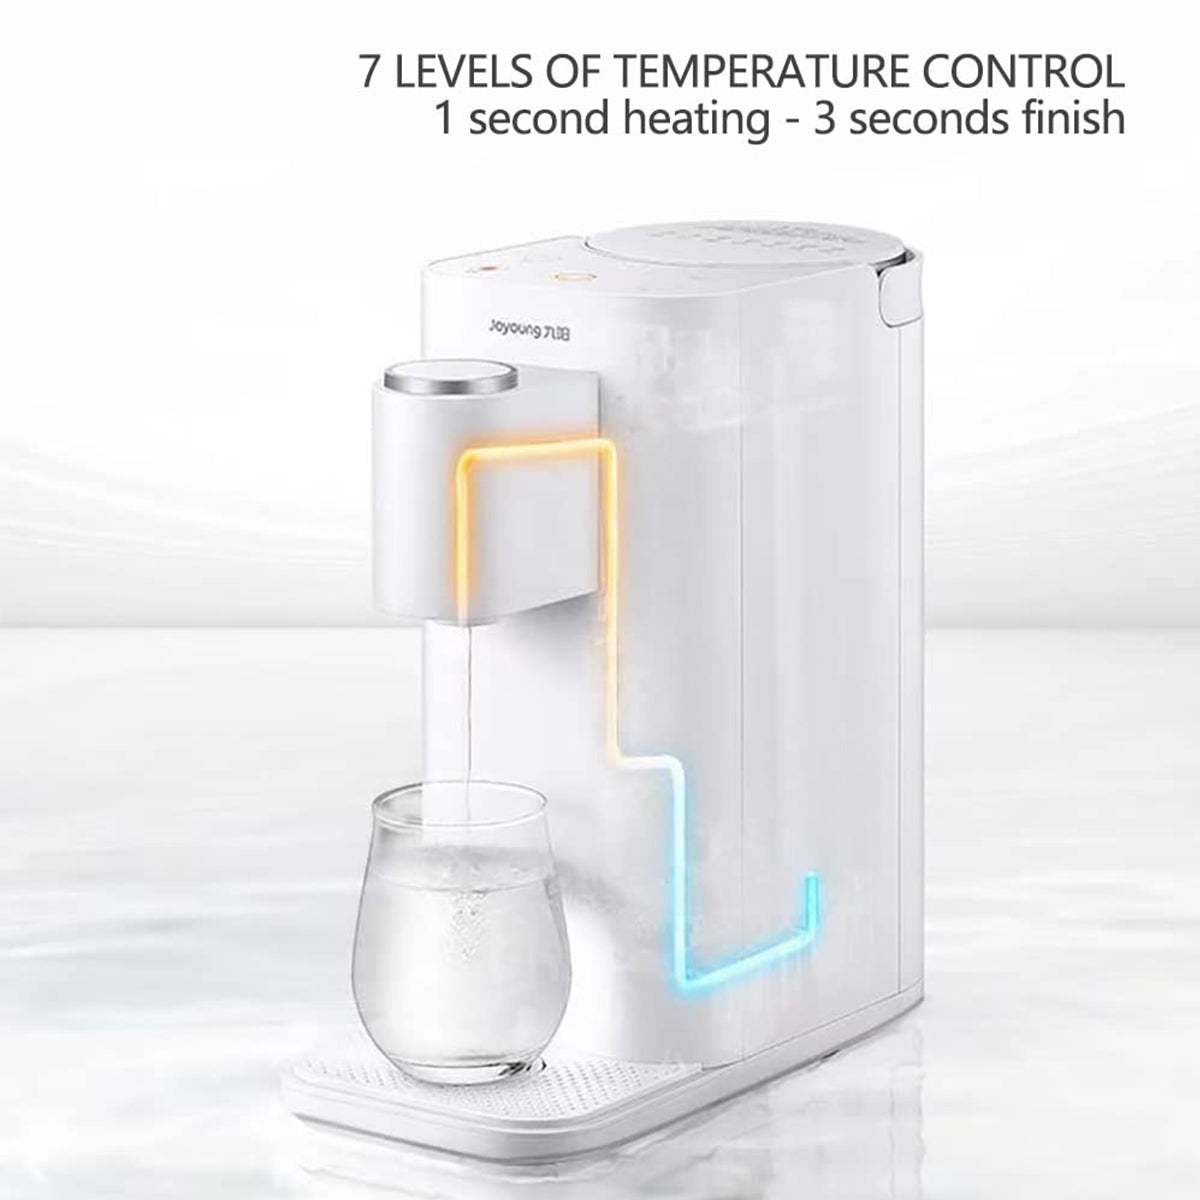 Joyoung 2L Instant Hot Water Dispenser - Countertop Drink Boiler with 7 Temperature Levels and Child Lock